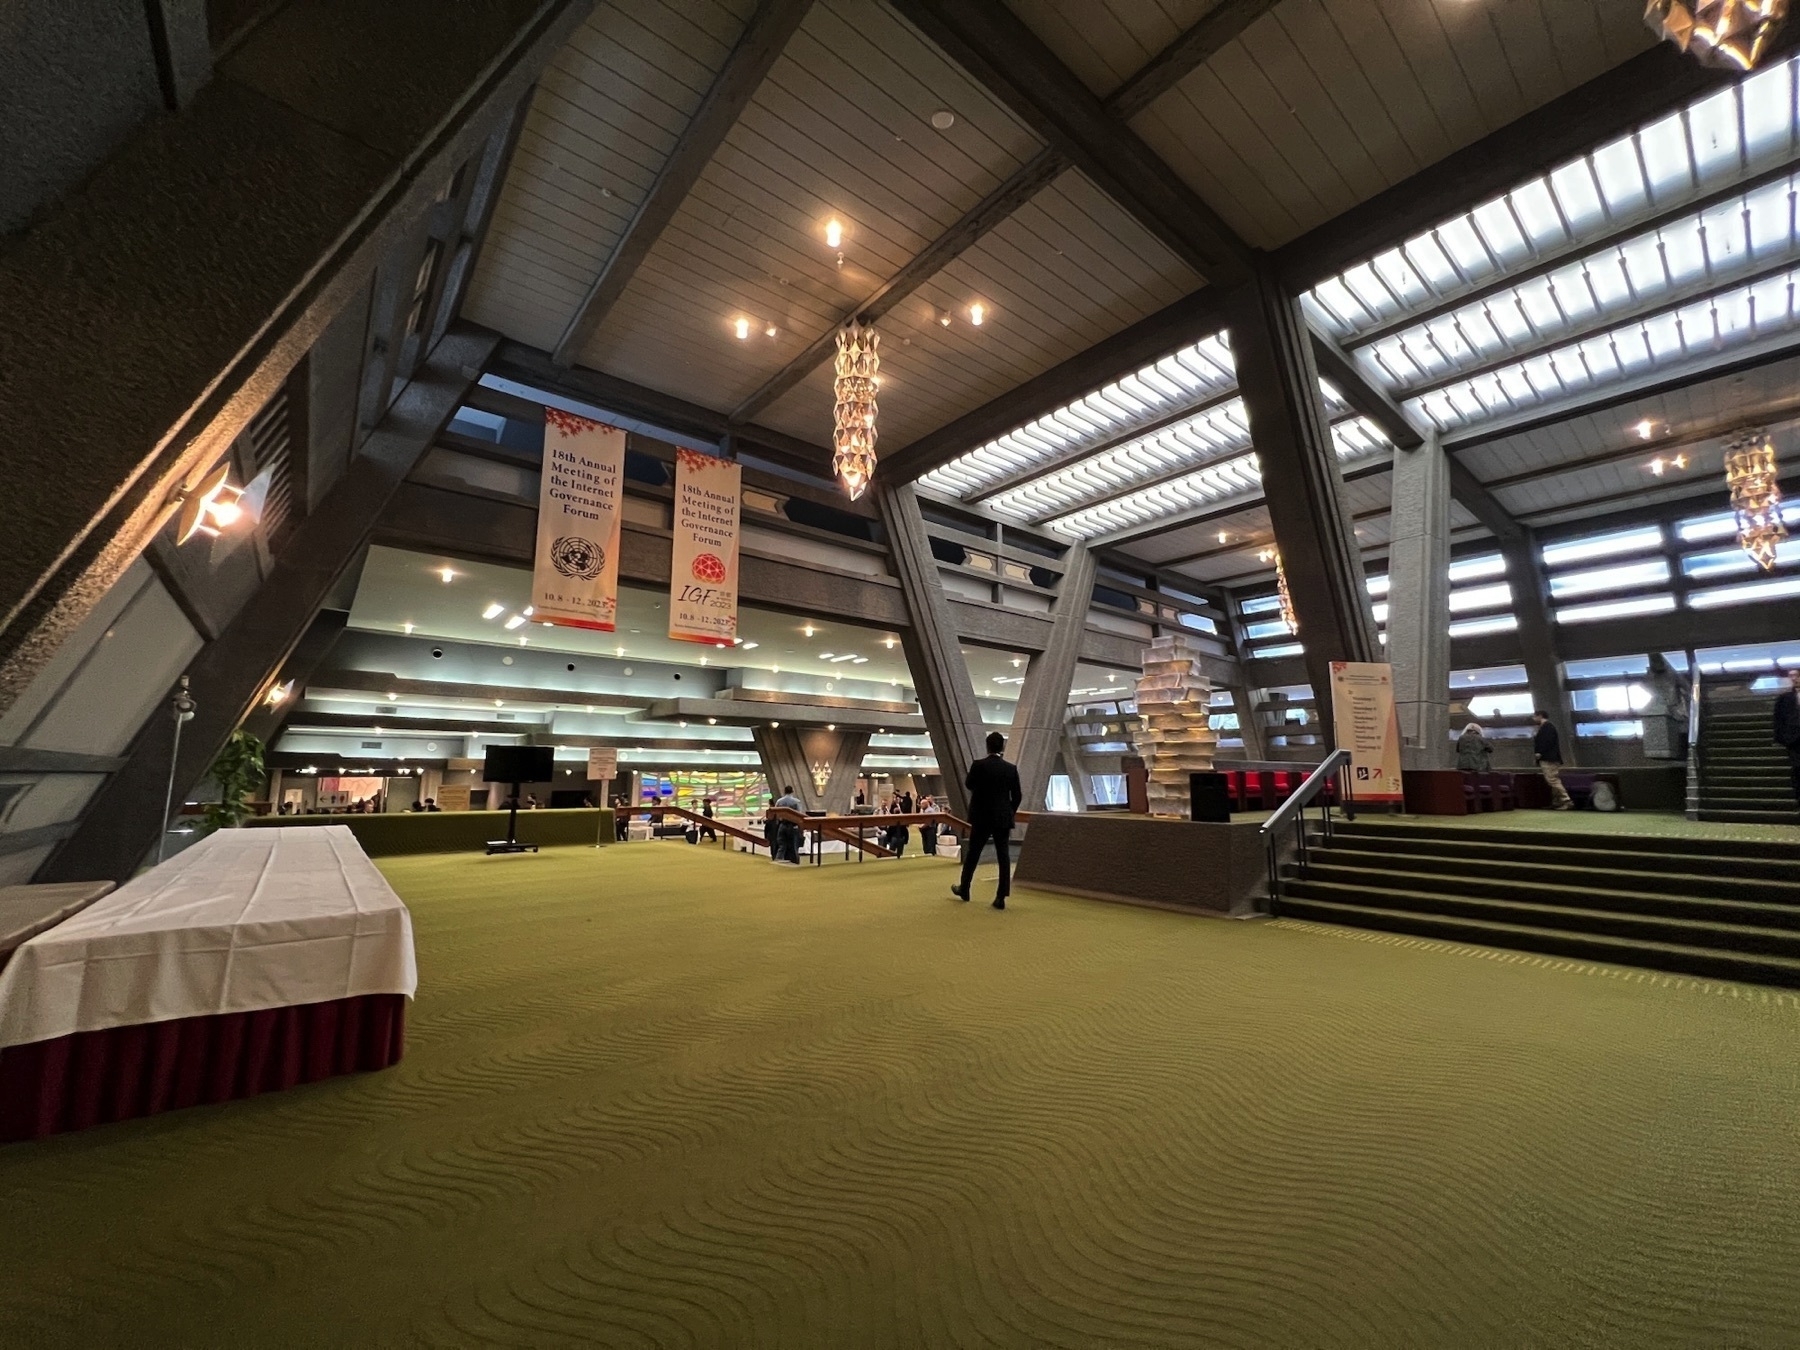 Inside of the main KICC lobby with the green carpet and not-so-accessible staircases everywhere